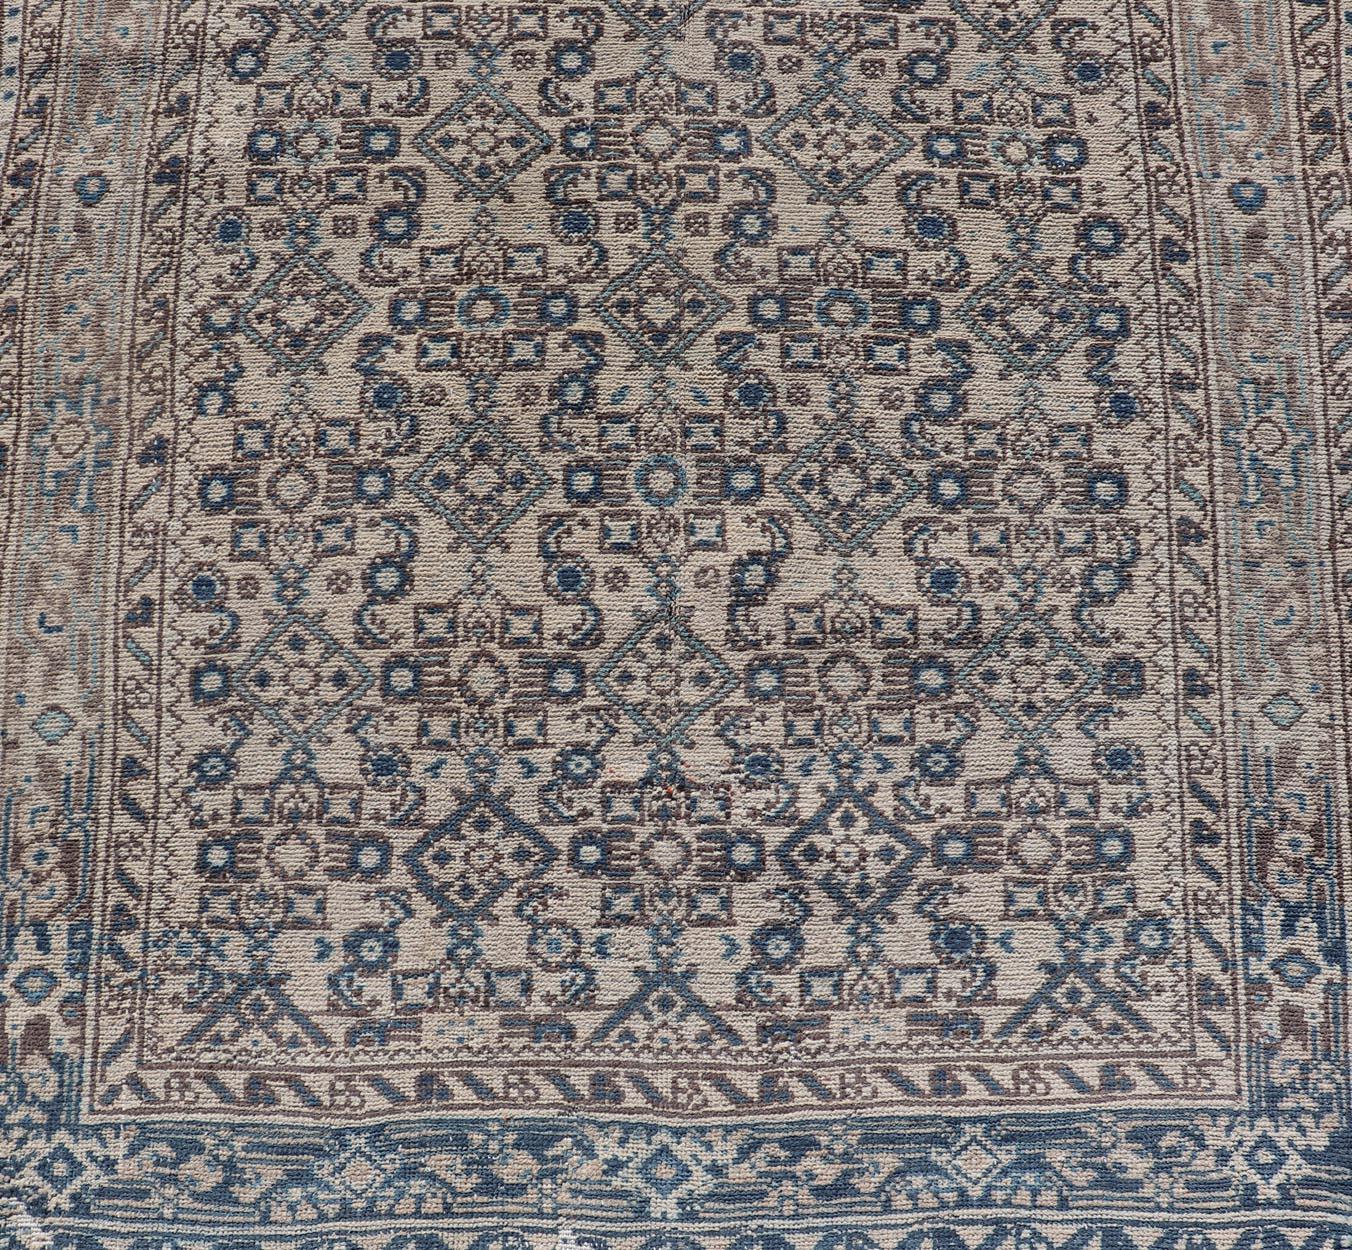 Malayer Vintage Persian Hamadan Runner in Cool Tones of Light Blue, Ivory, and L. Brown For Sale